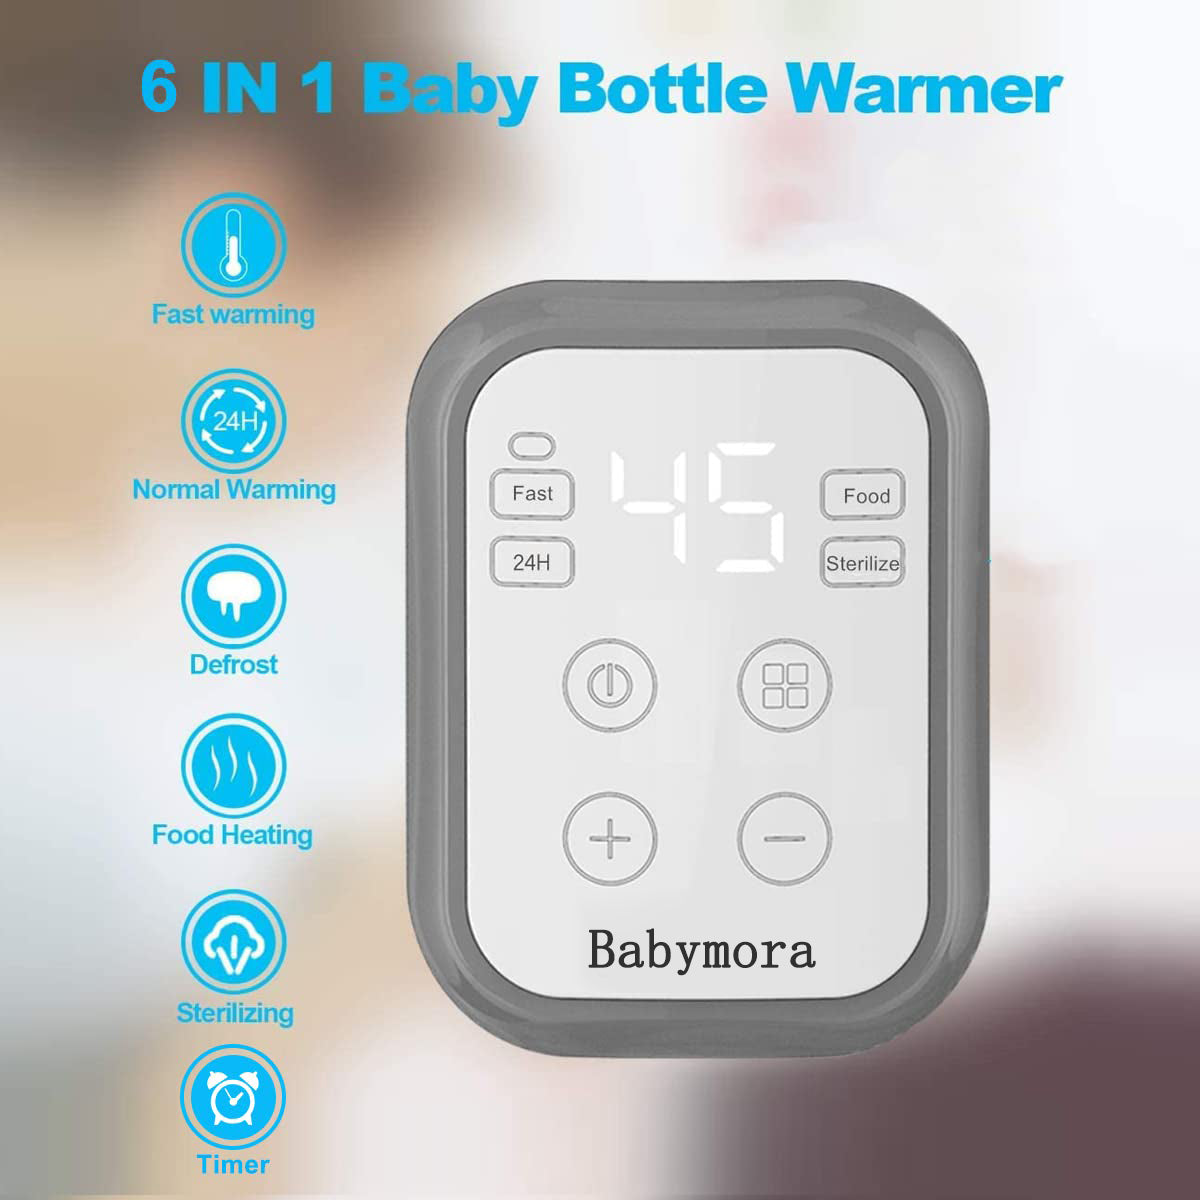 BABYMORA Bottle Warmer 6-in-1 Fast Baby Food Heater&Defrost BPA-Free Warmer with Timer LCD Display Accurate Temperature Control for Breastmilk or Formula